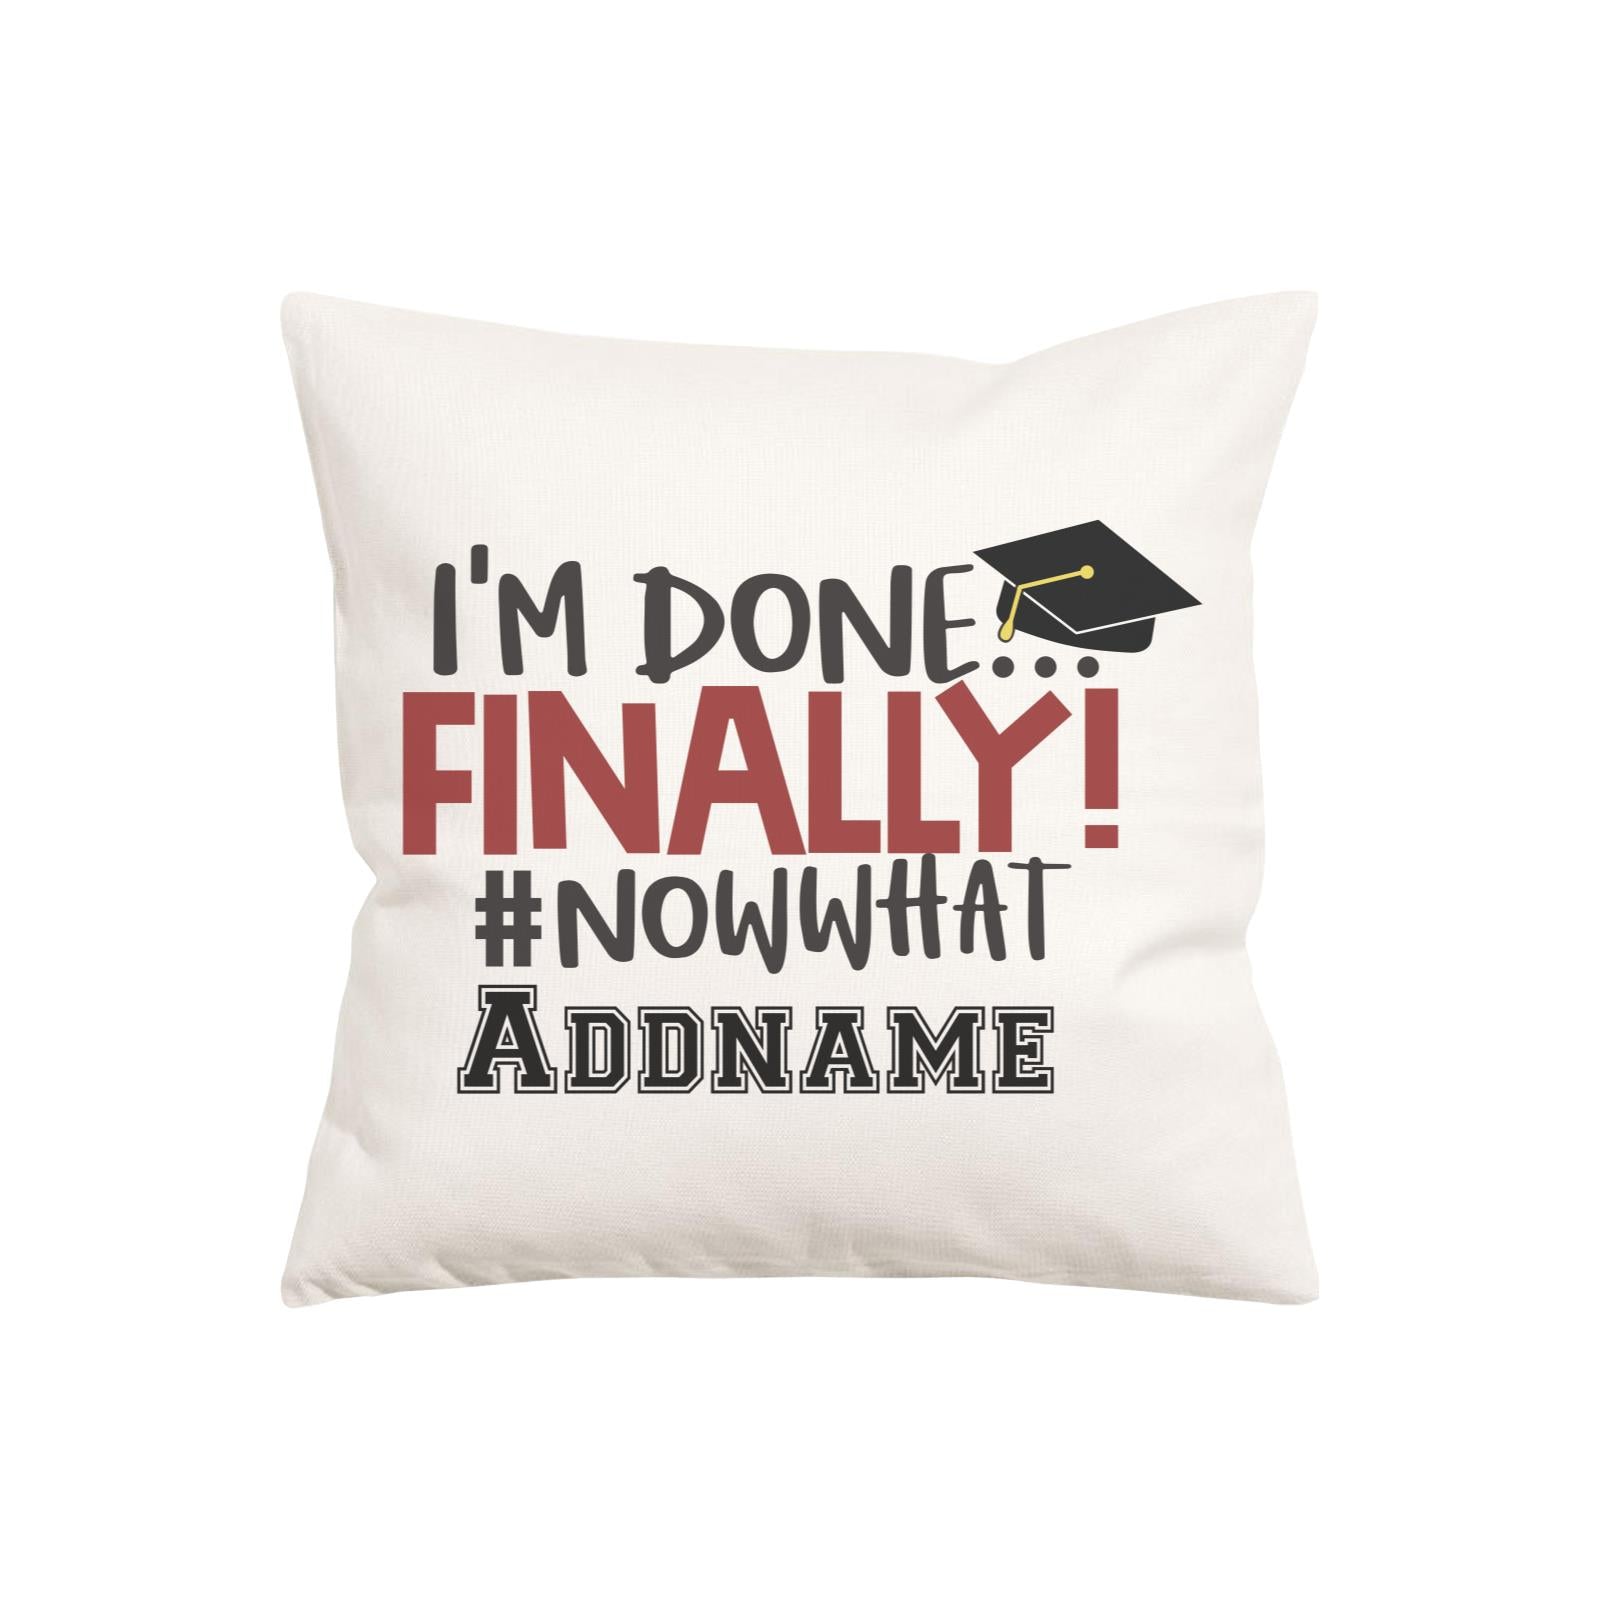 Graduation Series I'm Done, Finally! #Now What Pillow Cushion Cover with Inner Cushion